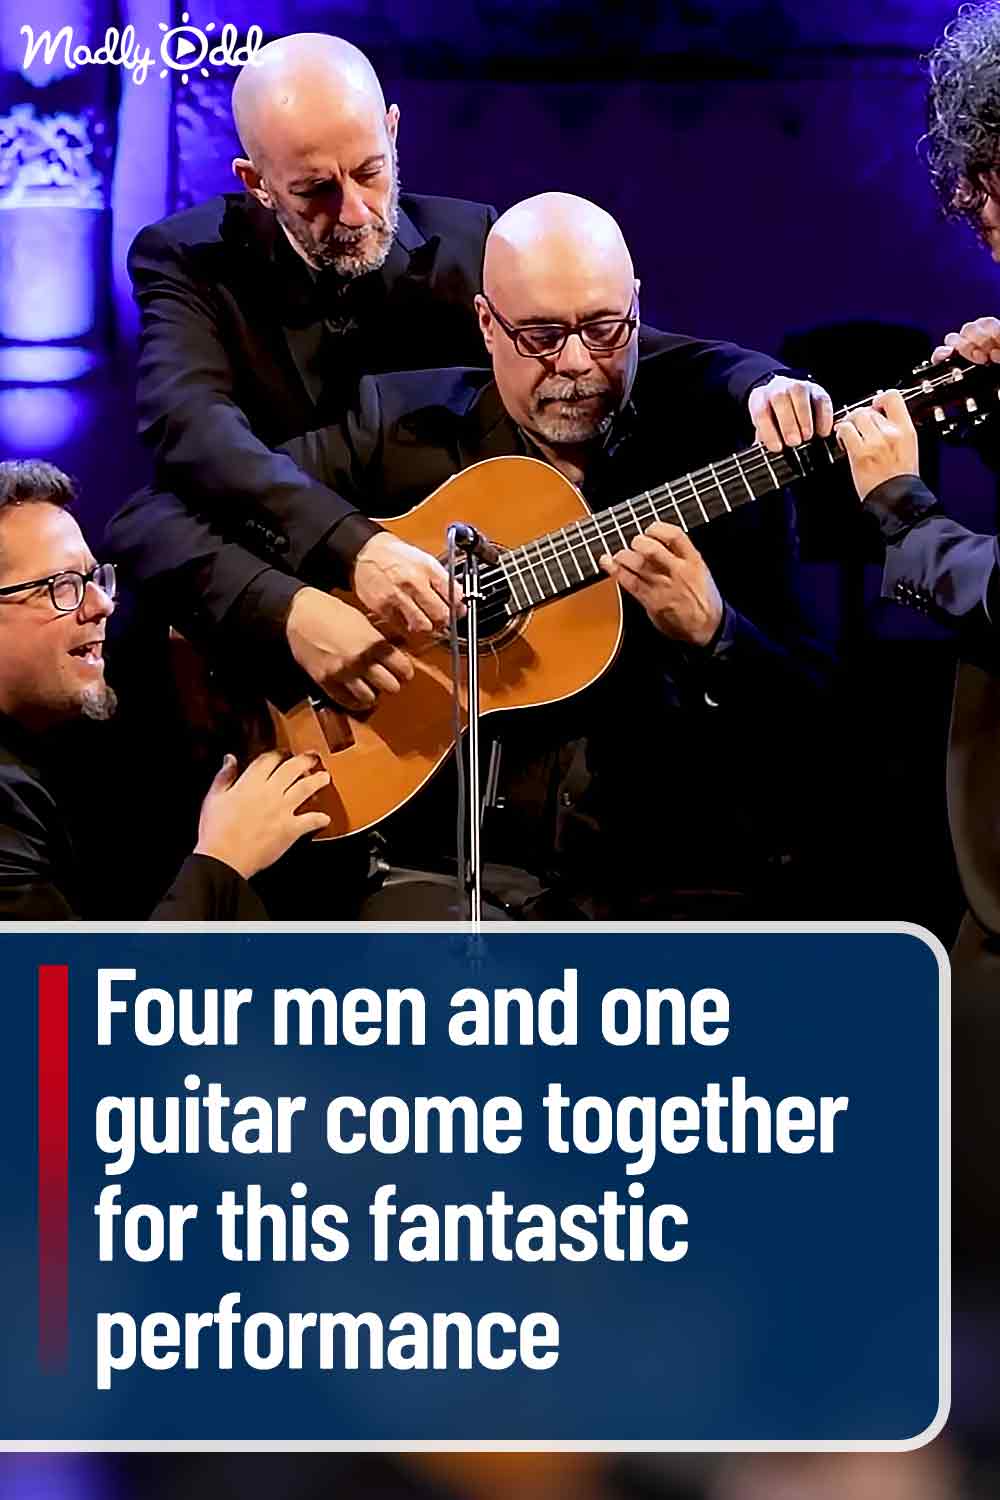 Four men and one guitar come together for this fantastic performance